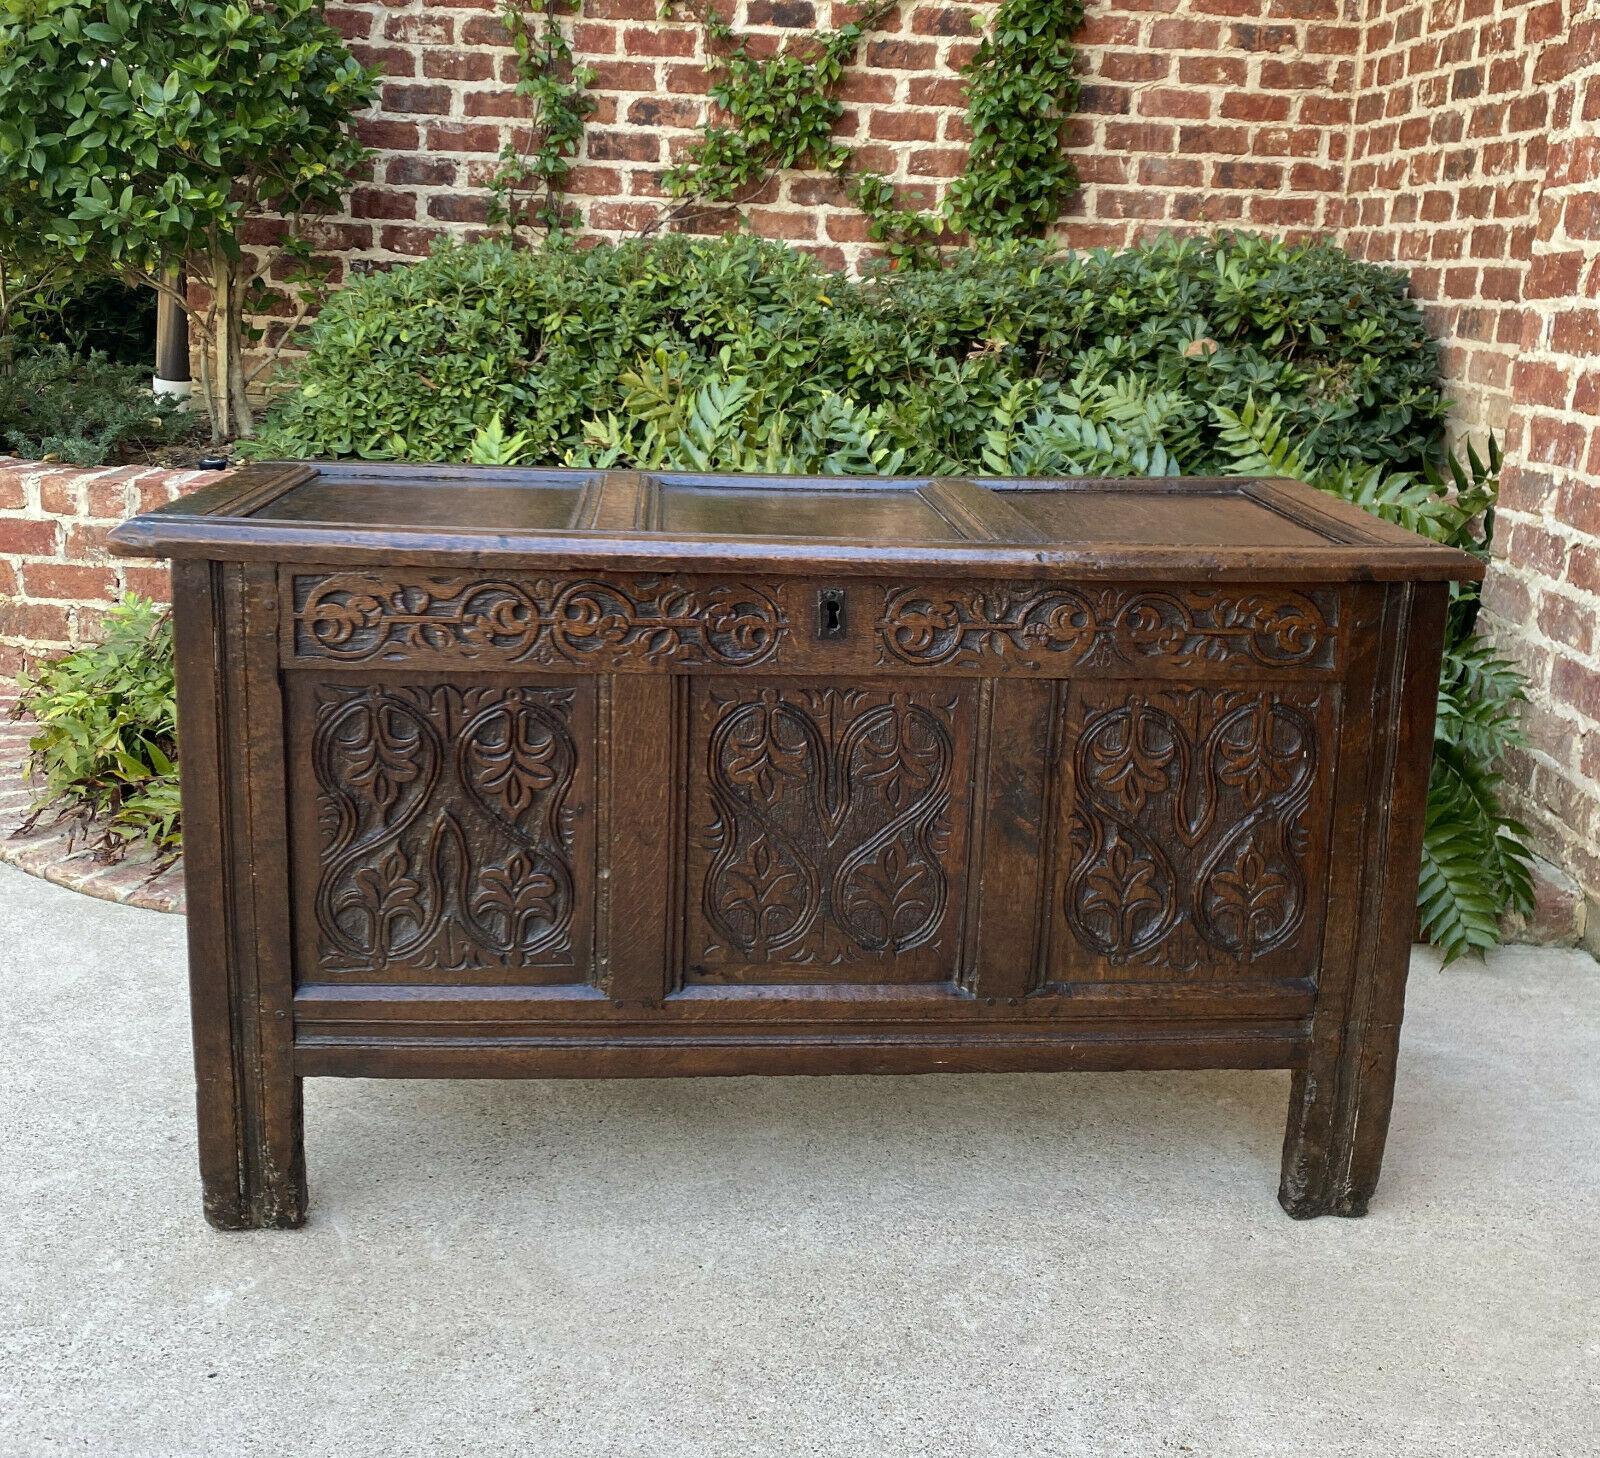 Handsome antique English highly carved oak blanket box, coffer, trunk, storage chest or bench~~18th century

These chests were originally used as strongboxes for holding money, jewelry and other valuables. The perfect size for a foyer, entry hall